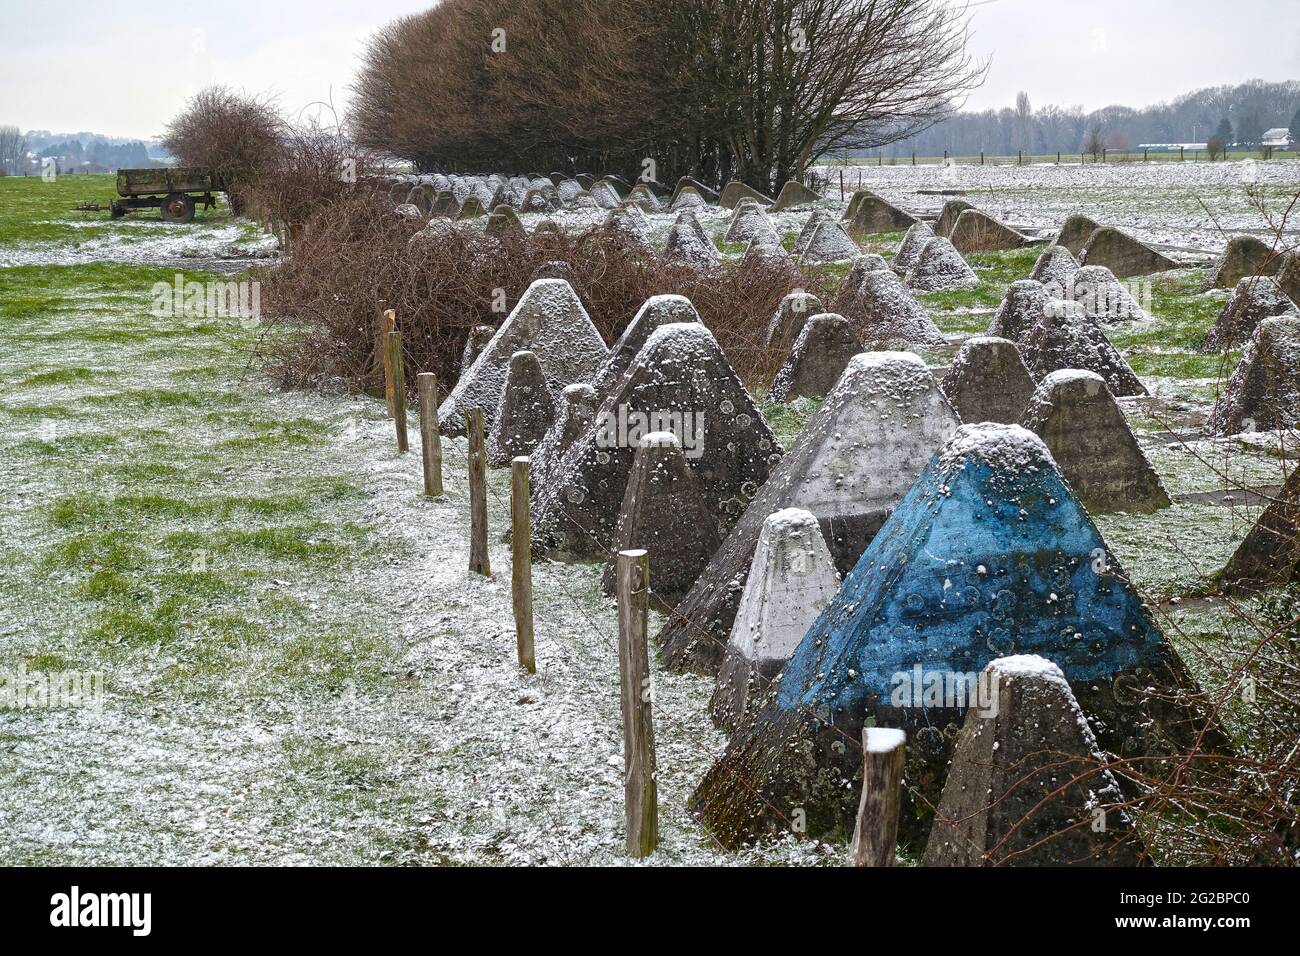 Pyramid-shaped concrete blocks, also called dragon's teeth, as part of the historic Westwall (Siegfried Line), built during World War II. by Germans t Stock Photo